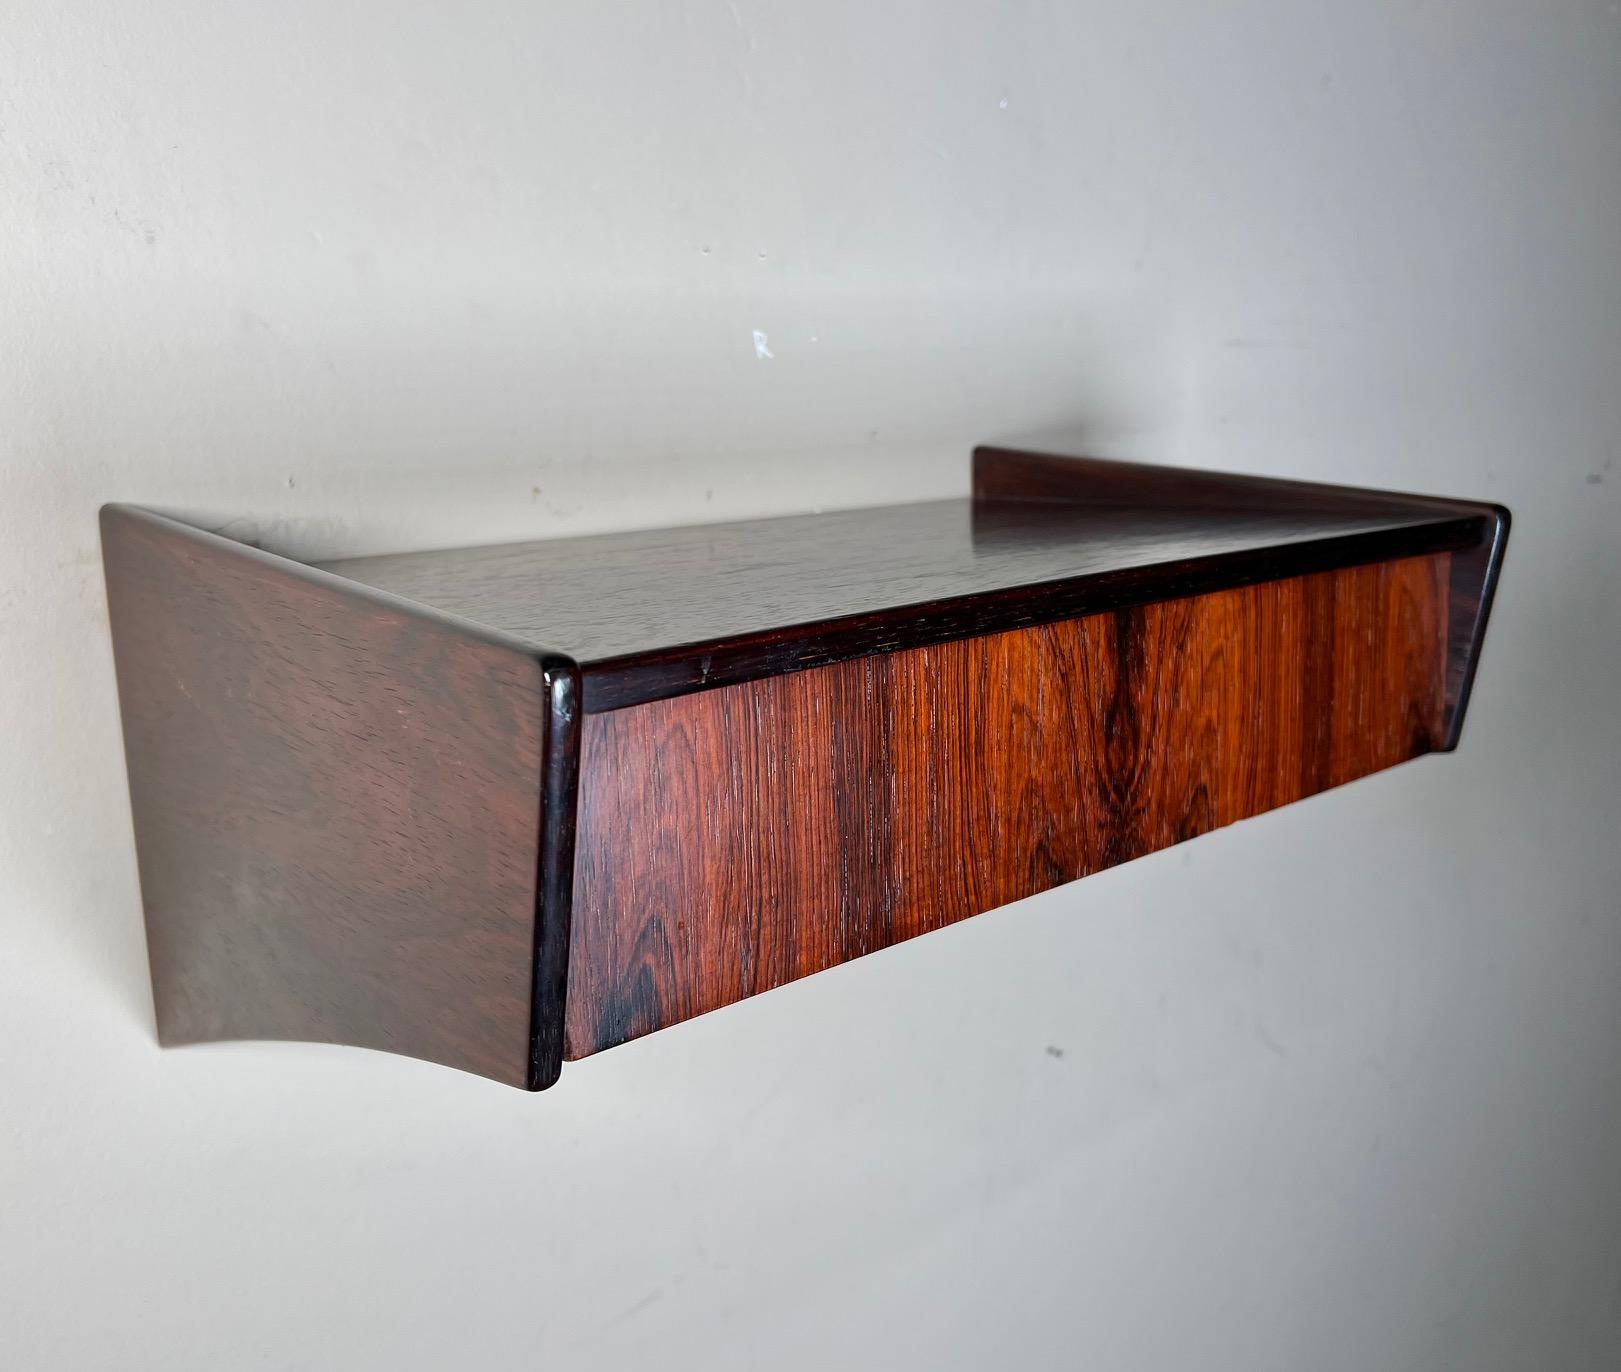 This is a set of Danish rosewood floating shelves. They could be used as nightstands or floating side tables. Featuring a drawer each. Mounted with 2 screws each (screws not included). Original makers stamp on the back.

They are in very good